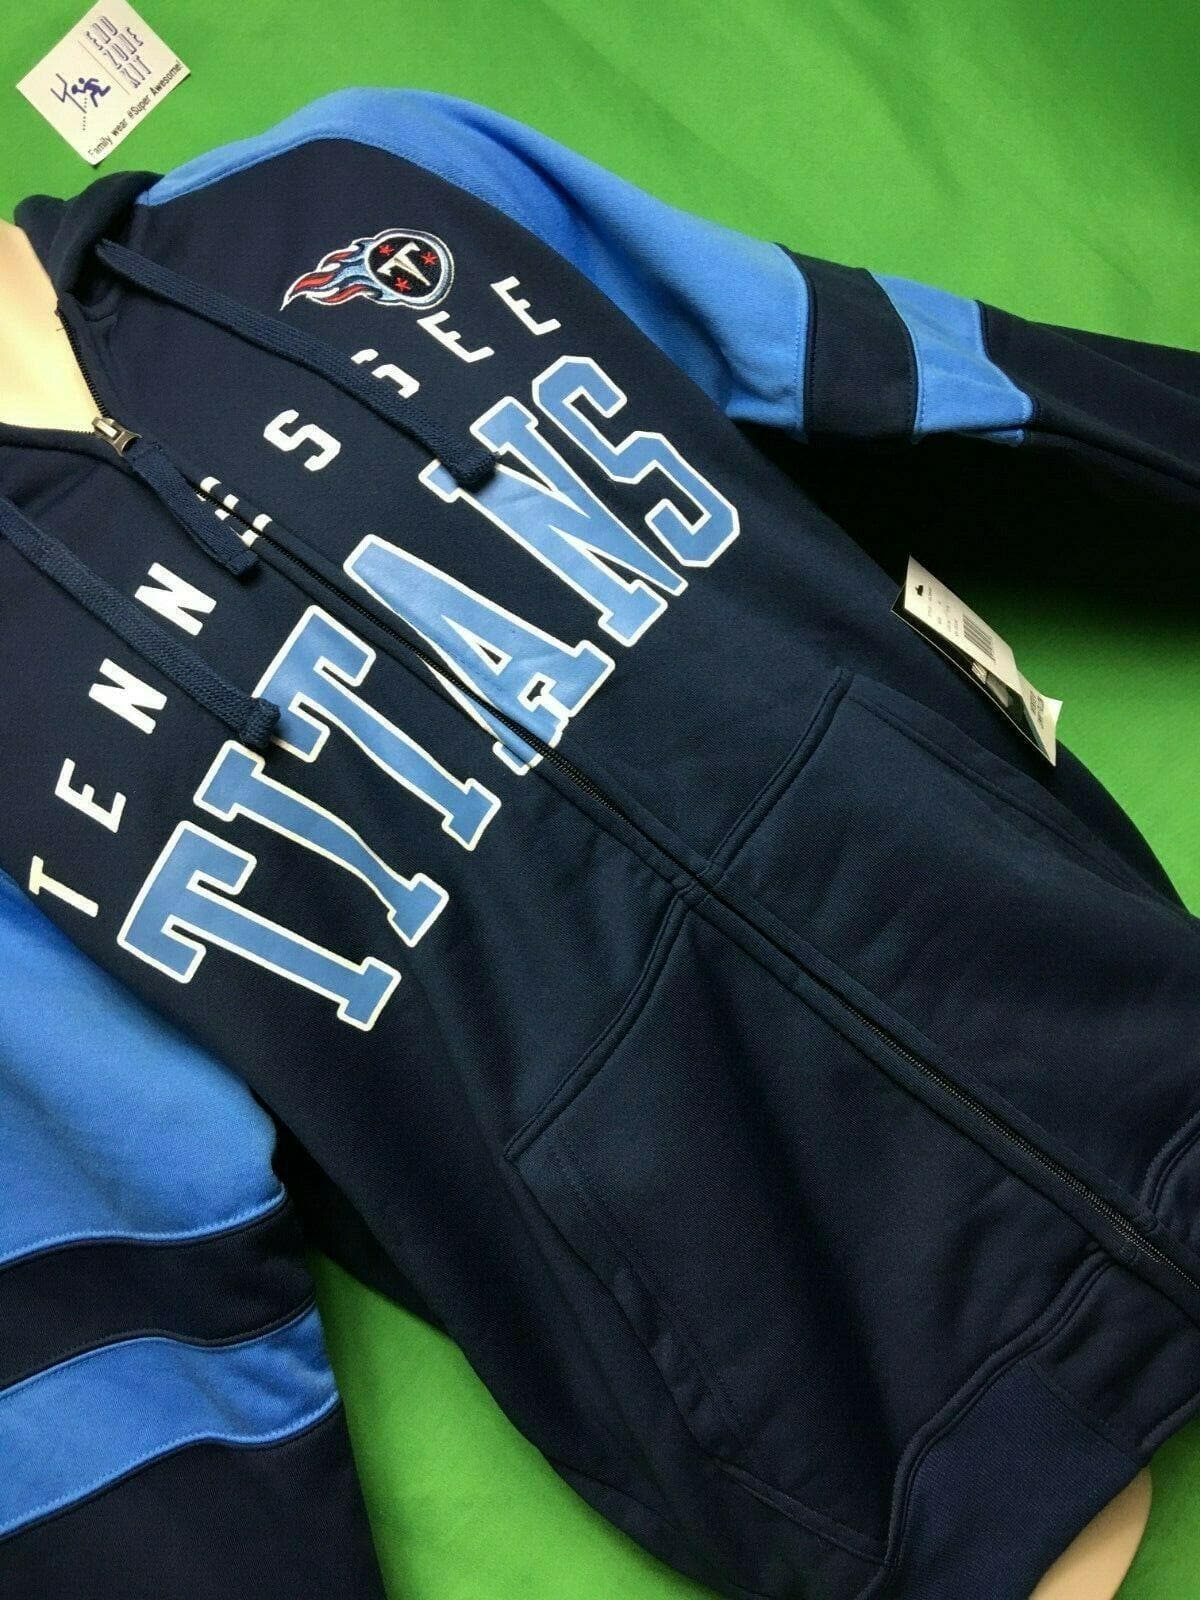 NFL Tennessee Titans Hands High Full Zip Hoodie Men's Large NWT